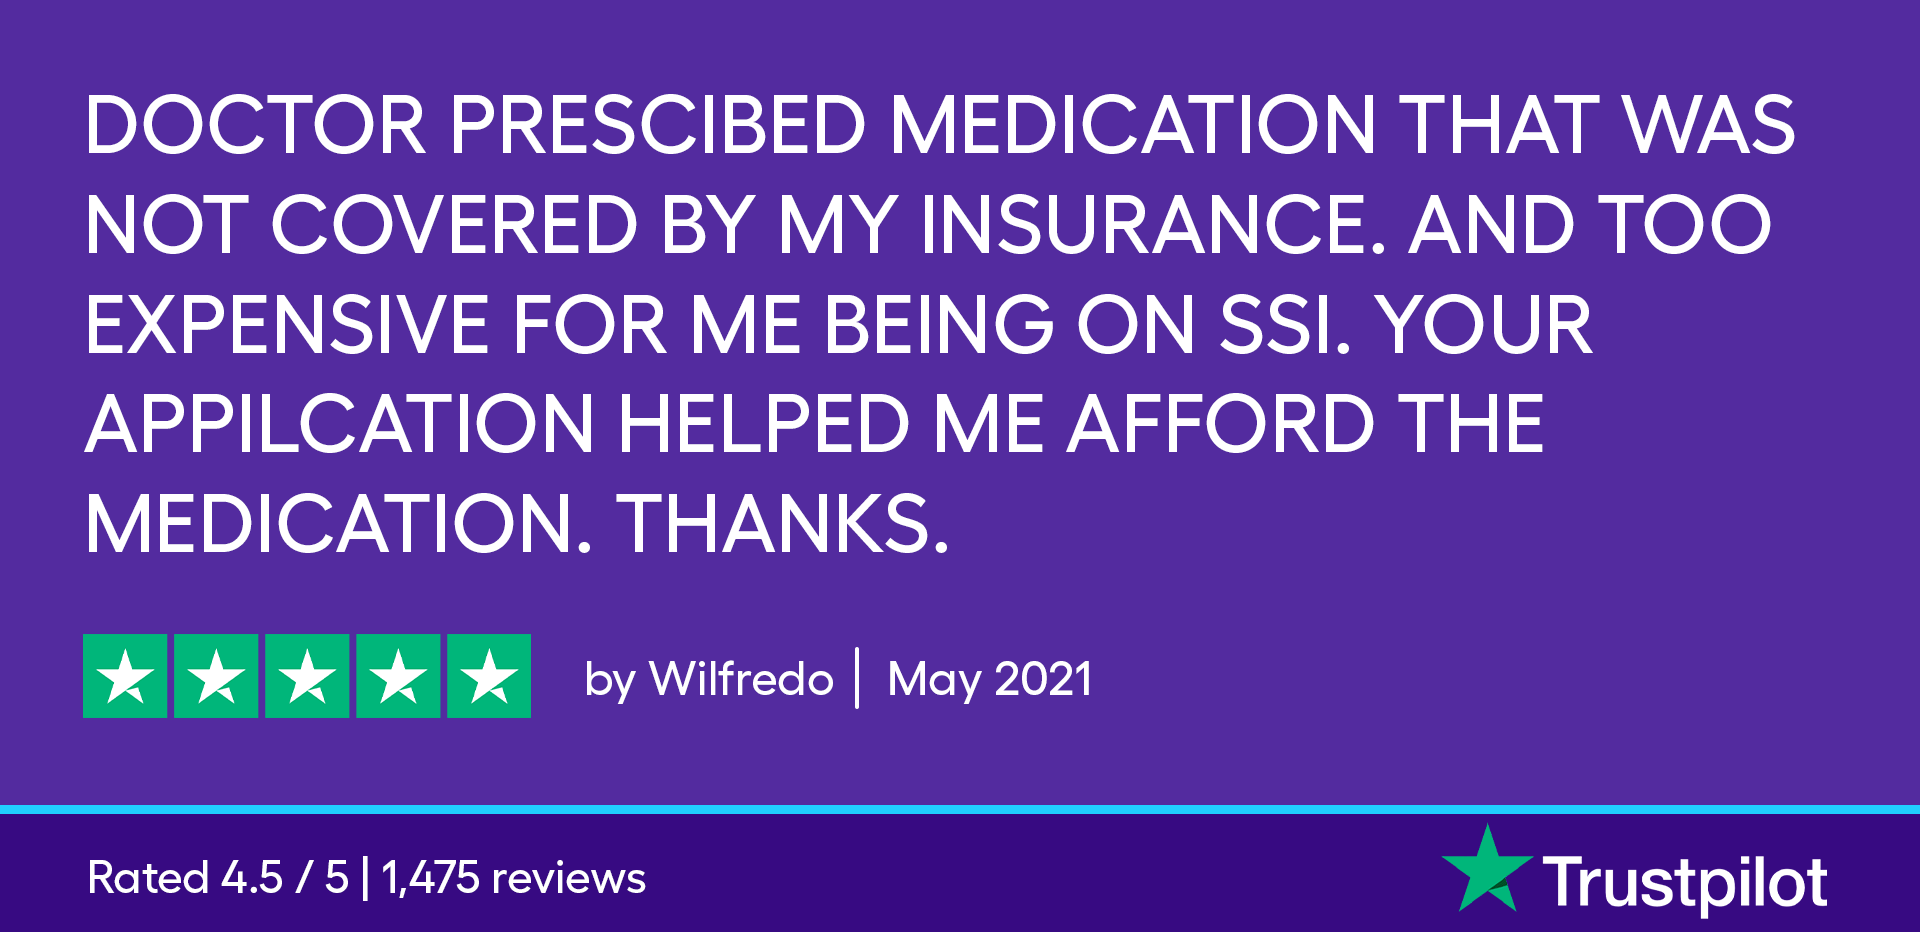 Doctor prescribed medication that was not covered by my insurance and too expensive for me being on SSI. Your application helped me afford the medication. Thanks.